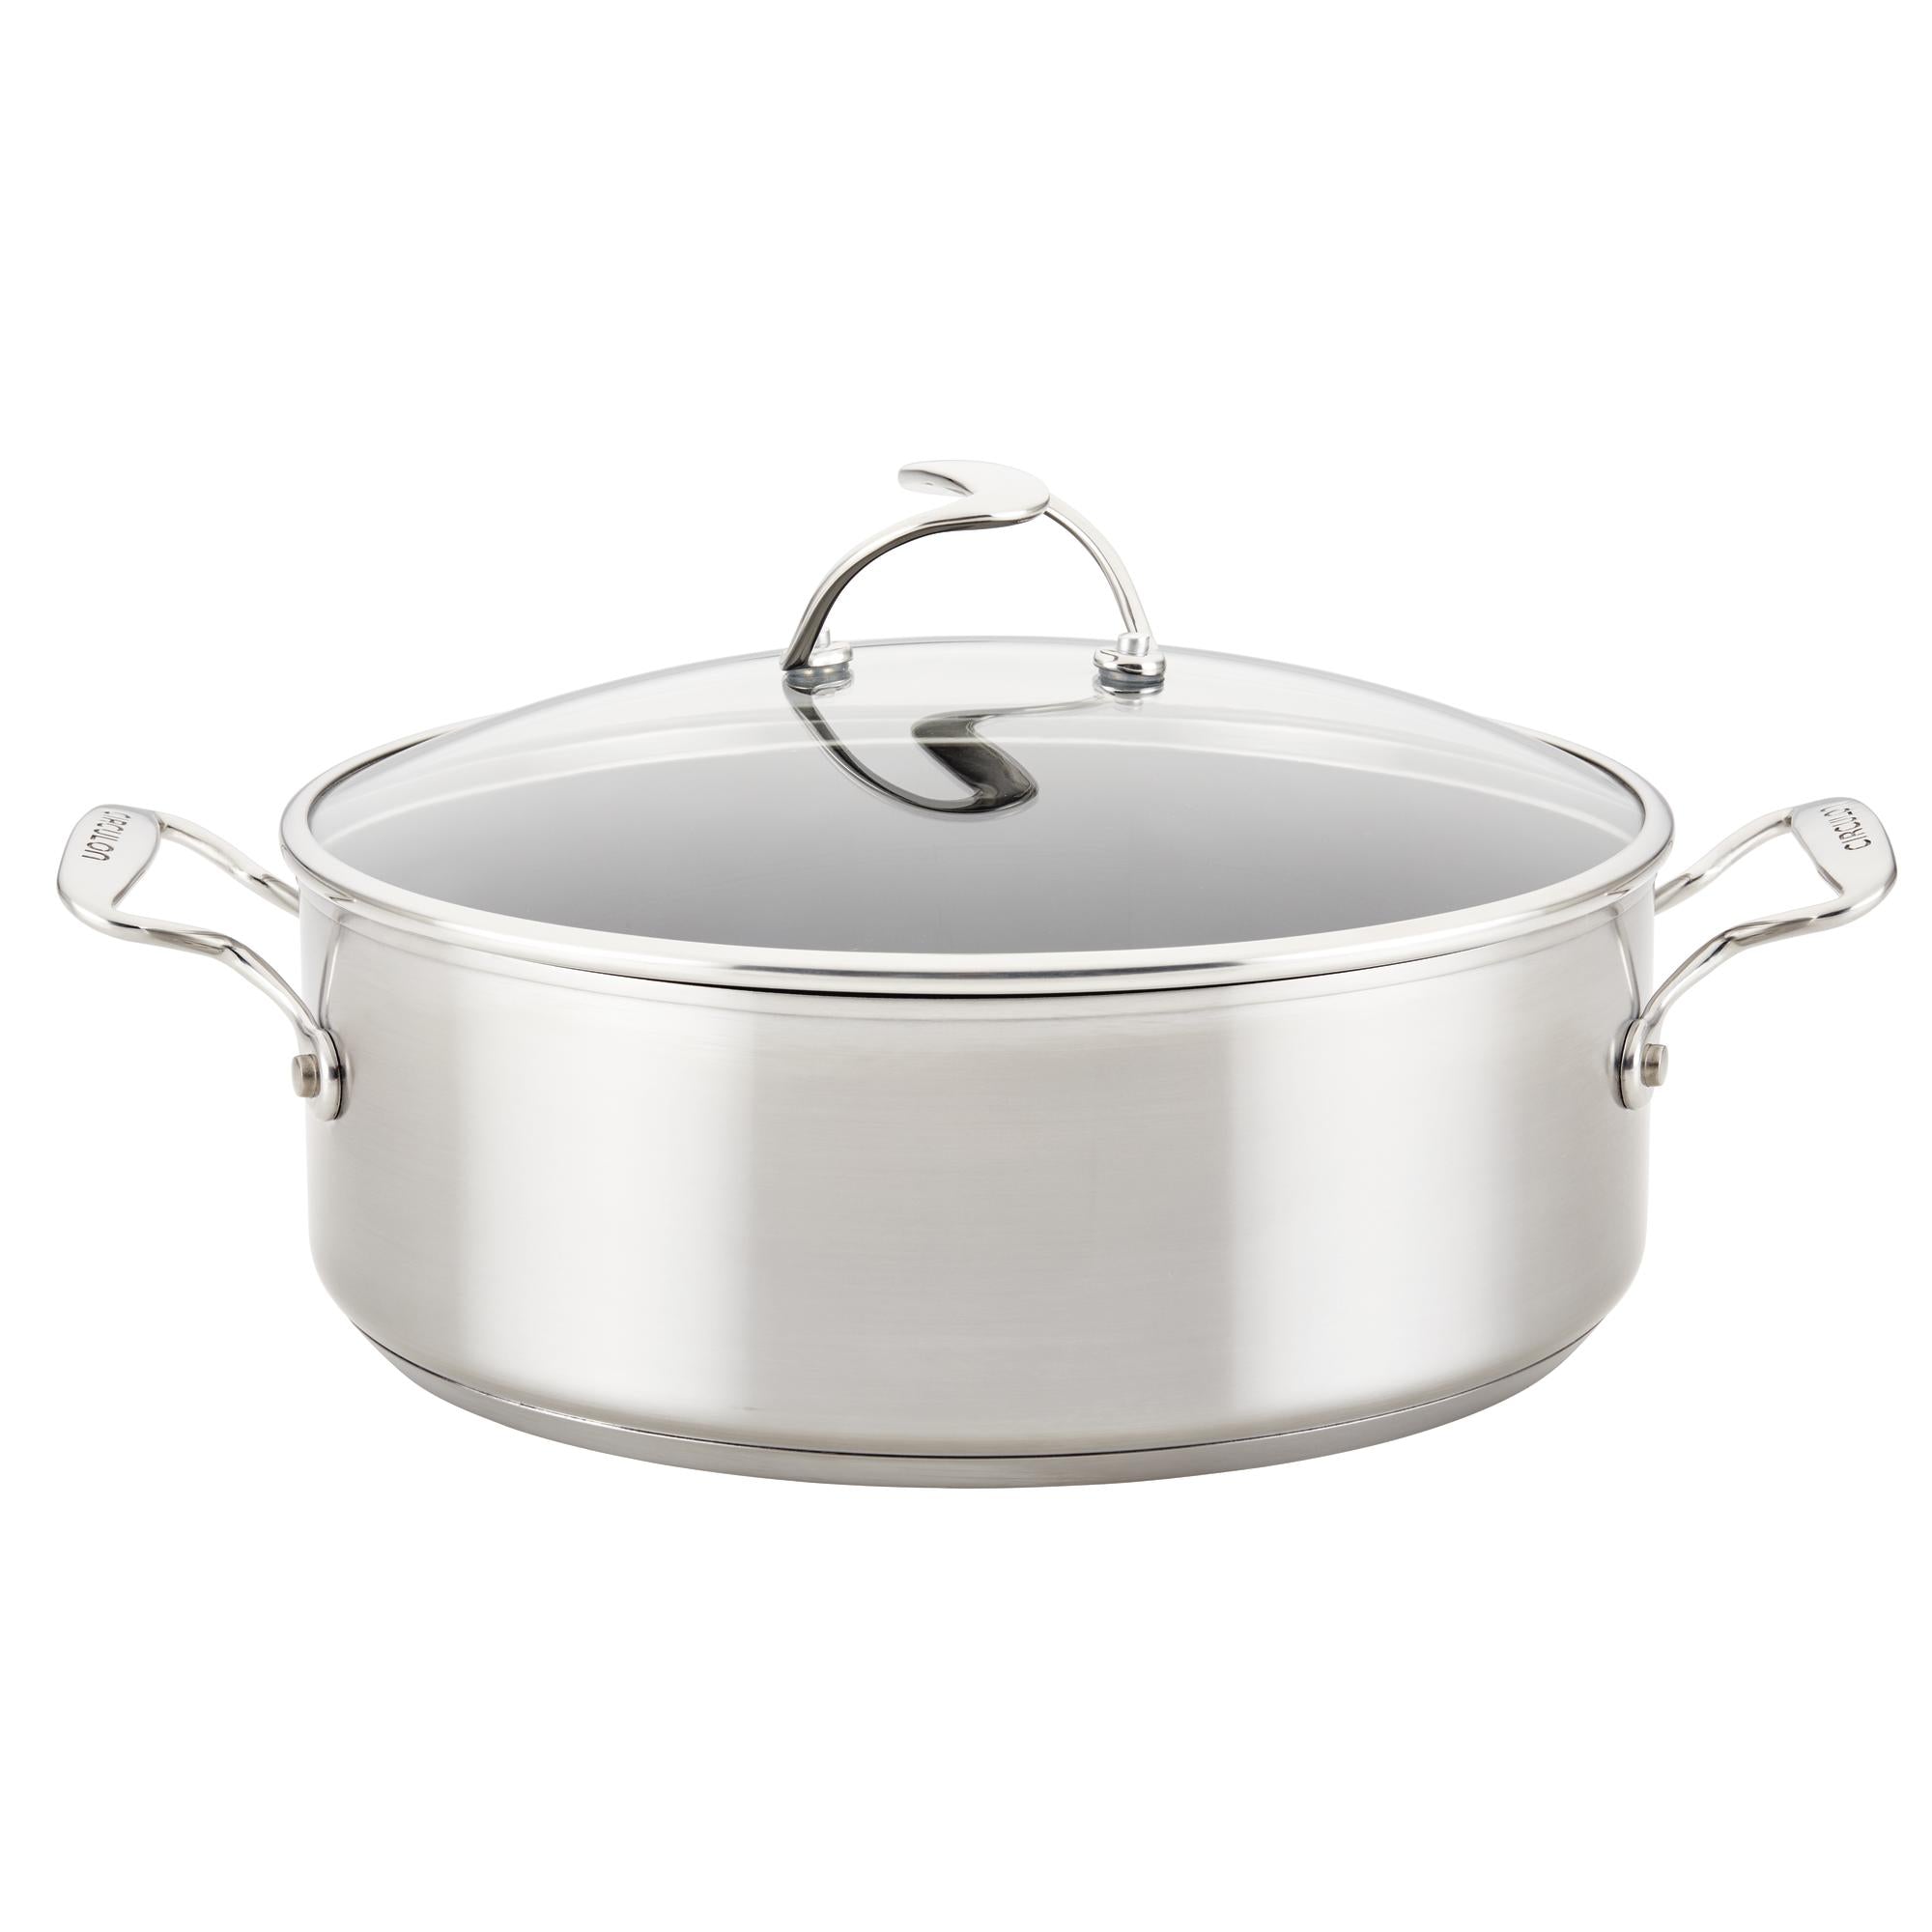 Cook N Home 5-Quart Stainless Steel Casserole Stockpot with Lid